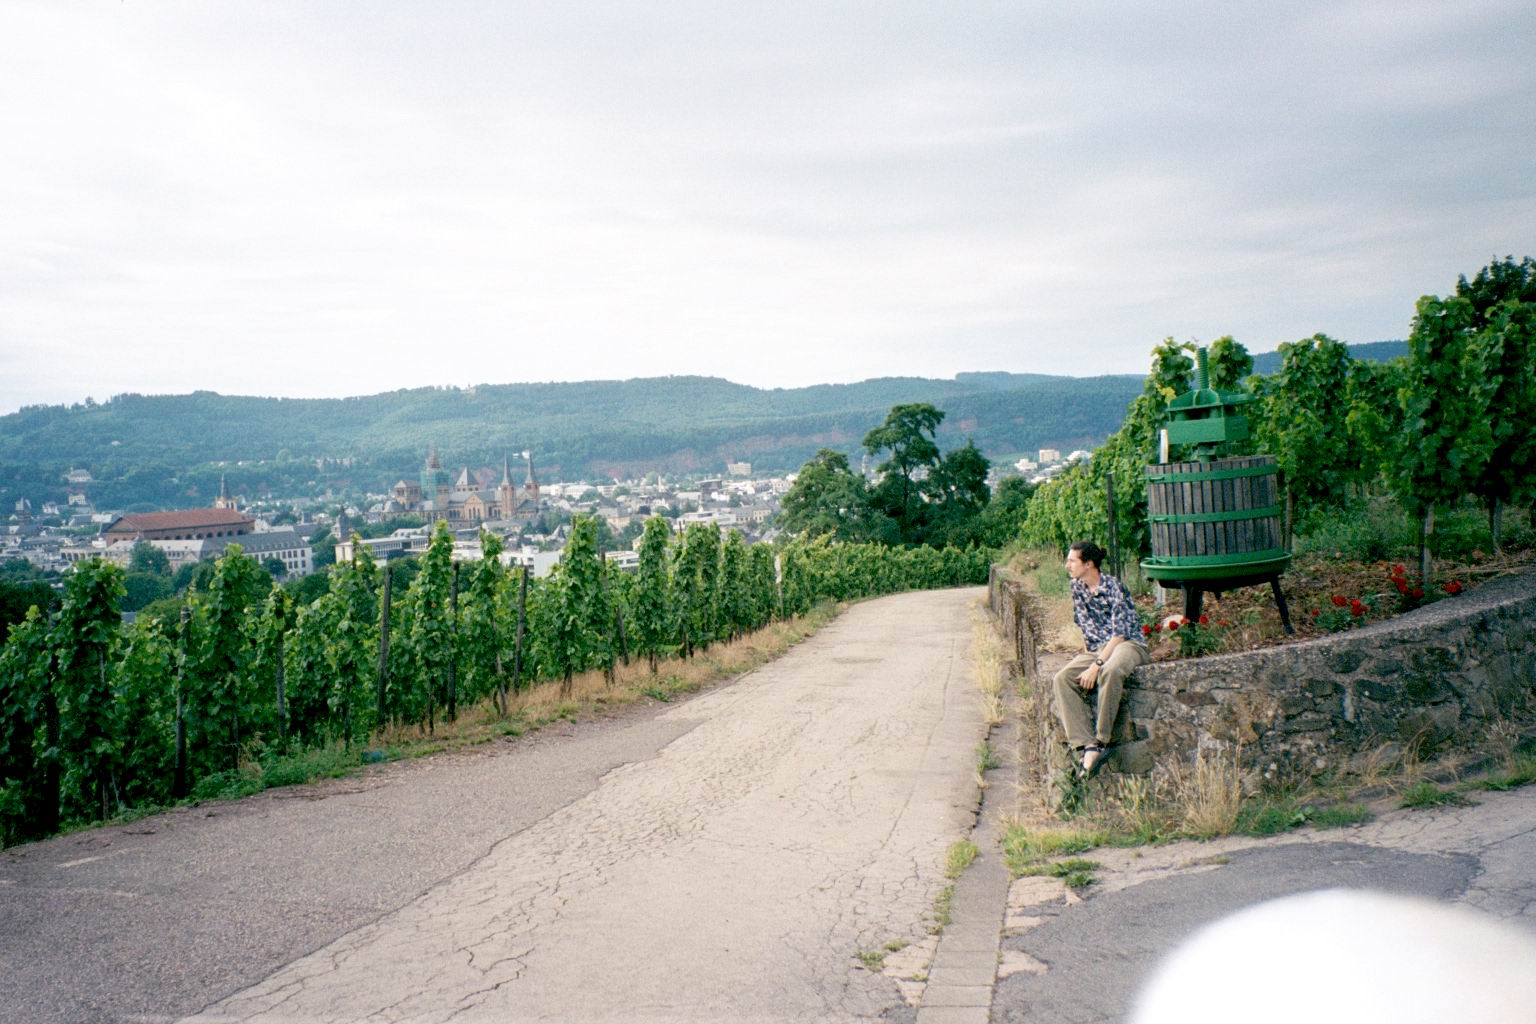 View of Trier from the wine hills